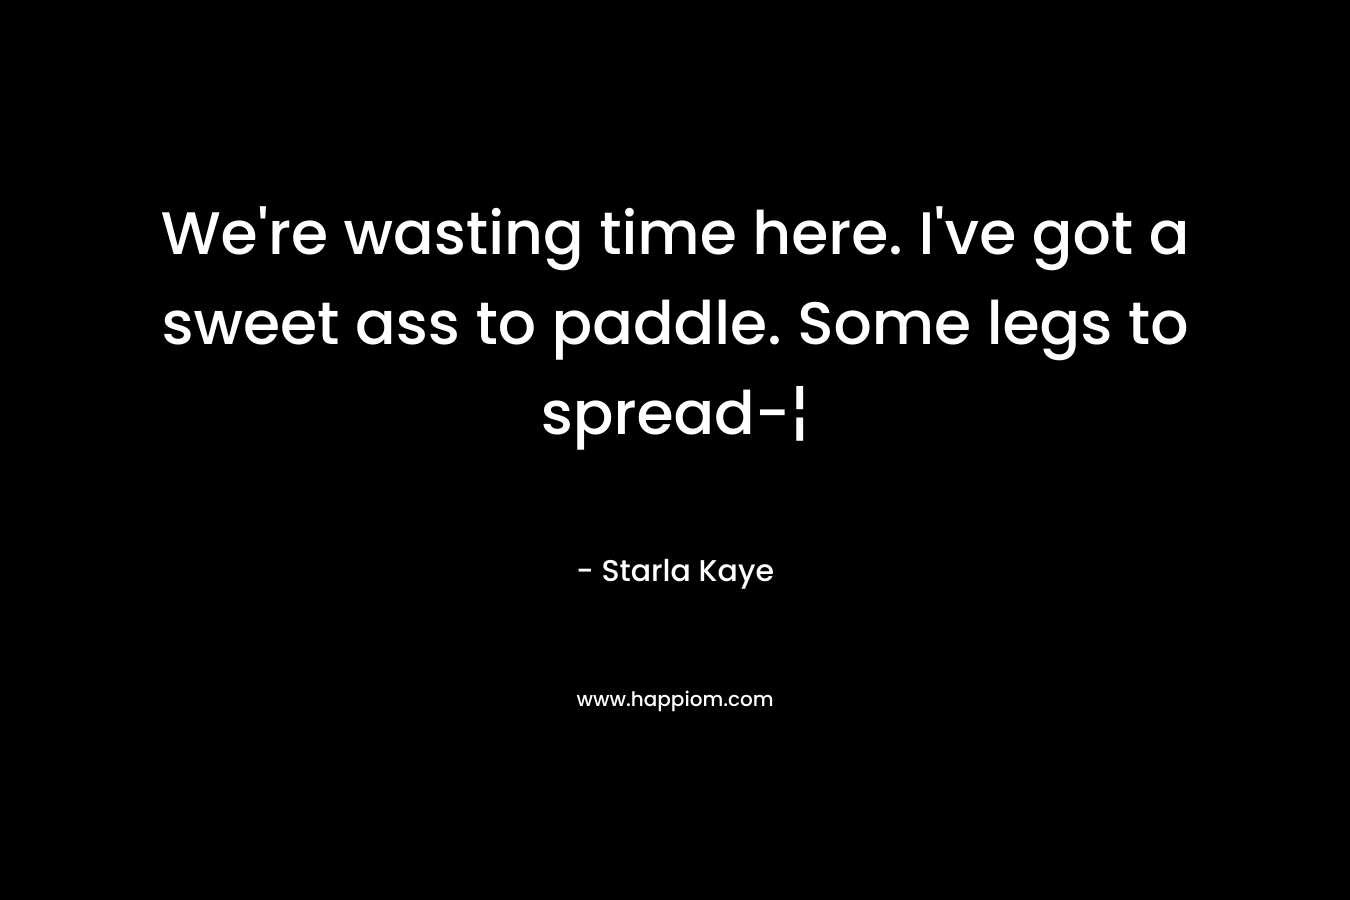 We’re wasting time here. I’ve got a sweet ass to paddle. Some legs to spread-¦ – Starla Kaye